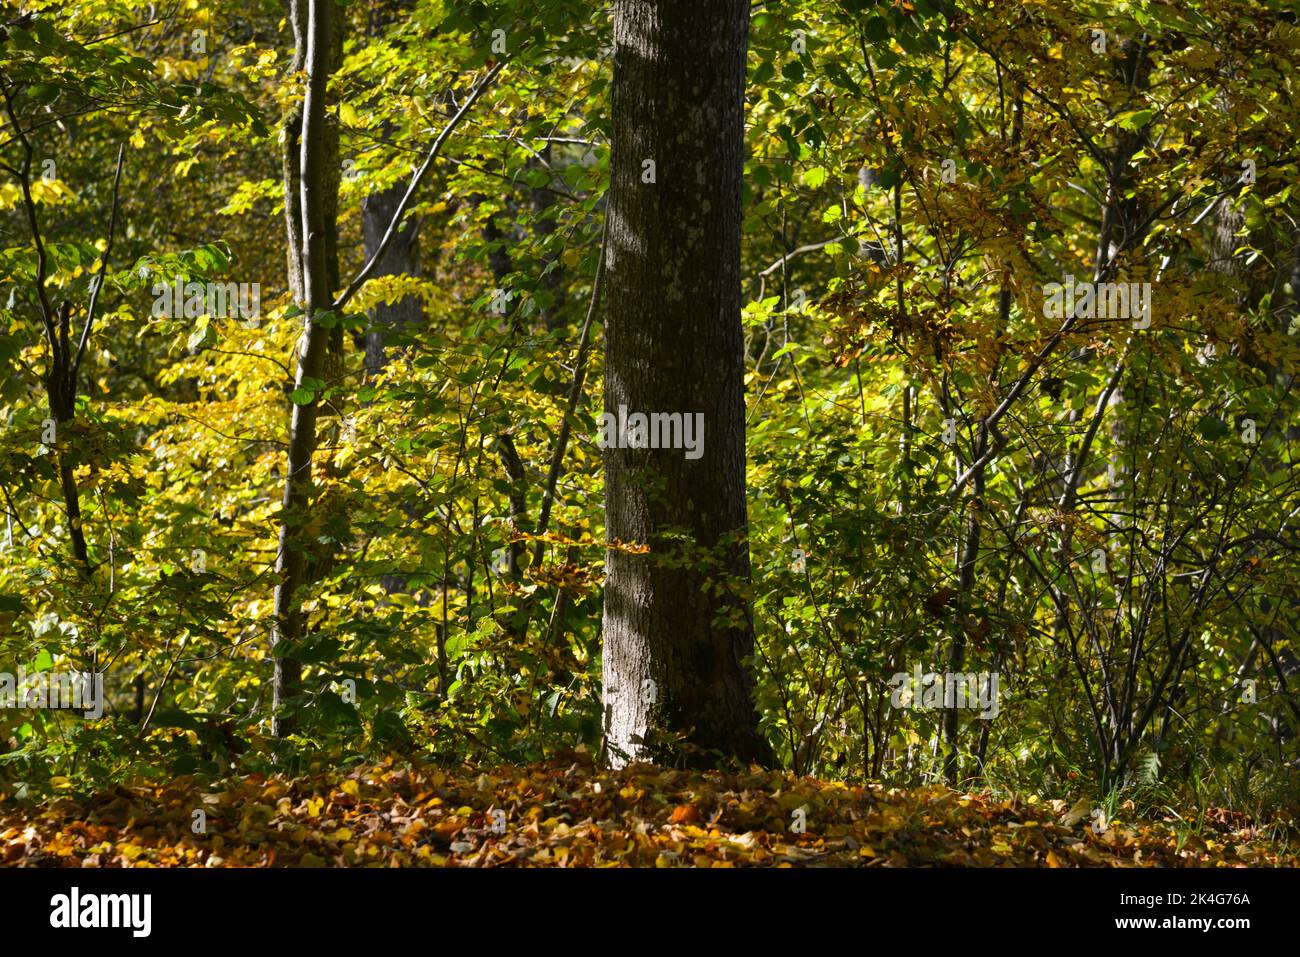 Tree trunk in colorful forest in autumn. colorful leaves of trees piled up on the ground. Stock Photo